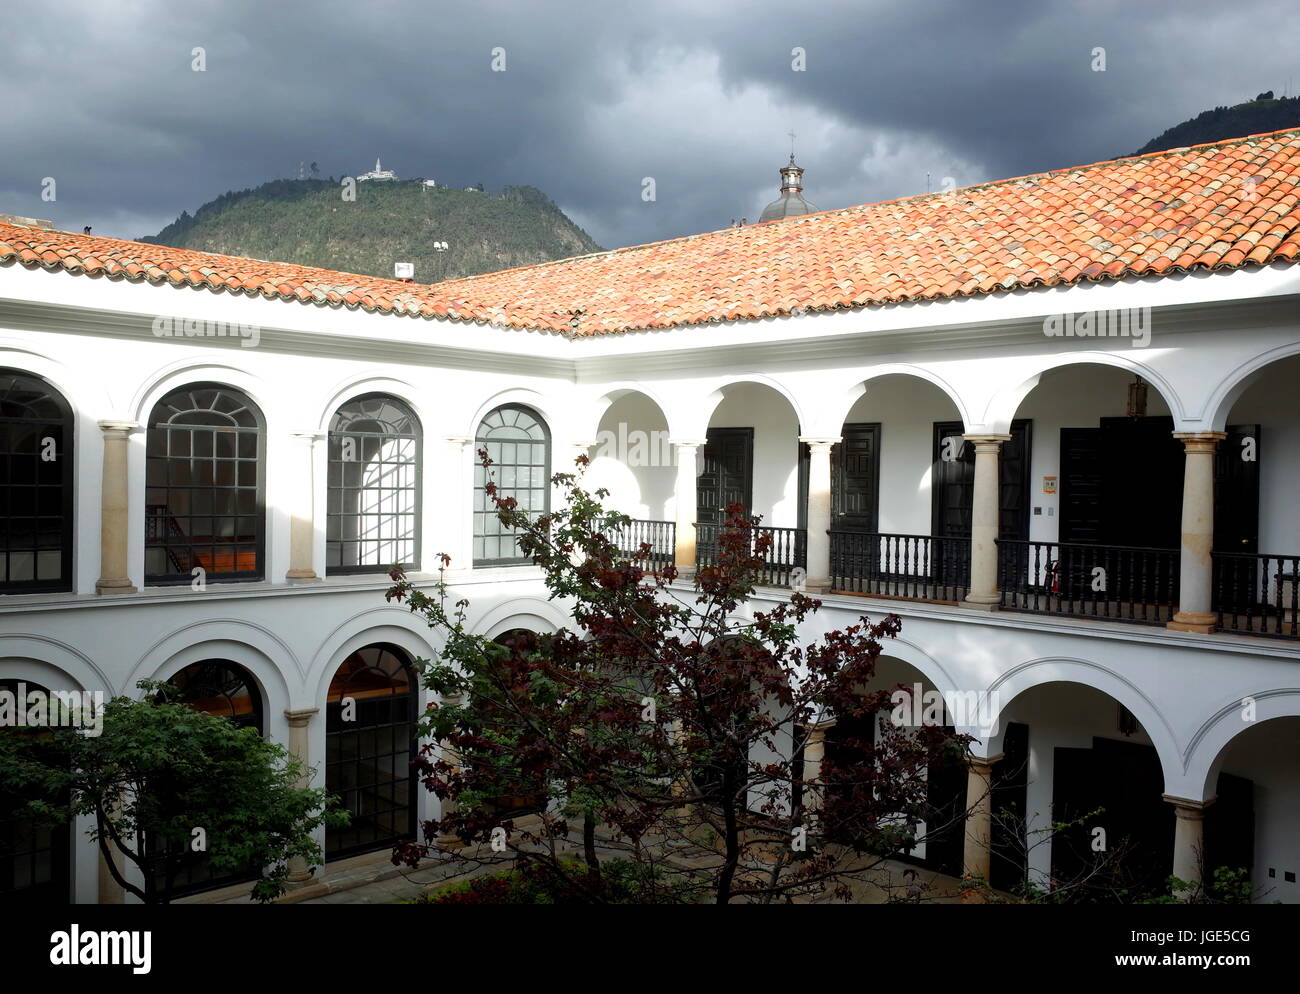 The courtyard of the Banco de la Republica Art museum with Monserrate in the background, Bogota, Colombia Stock Photo